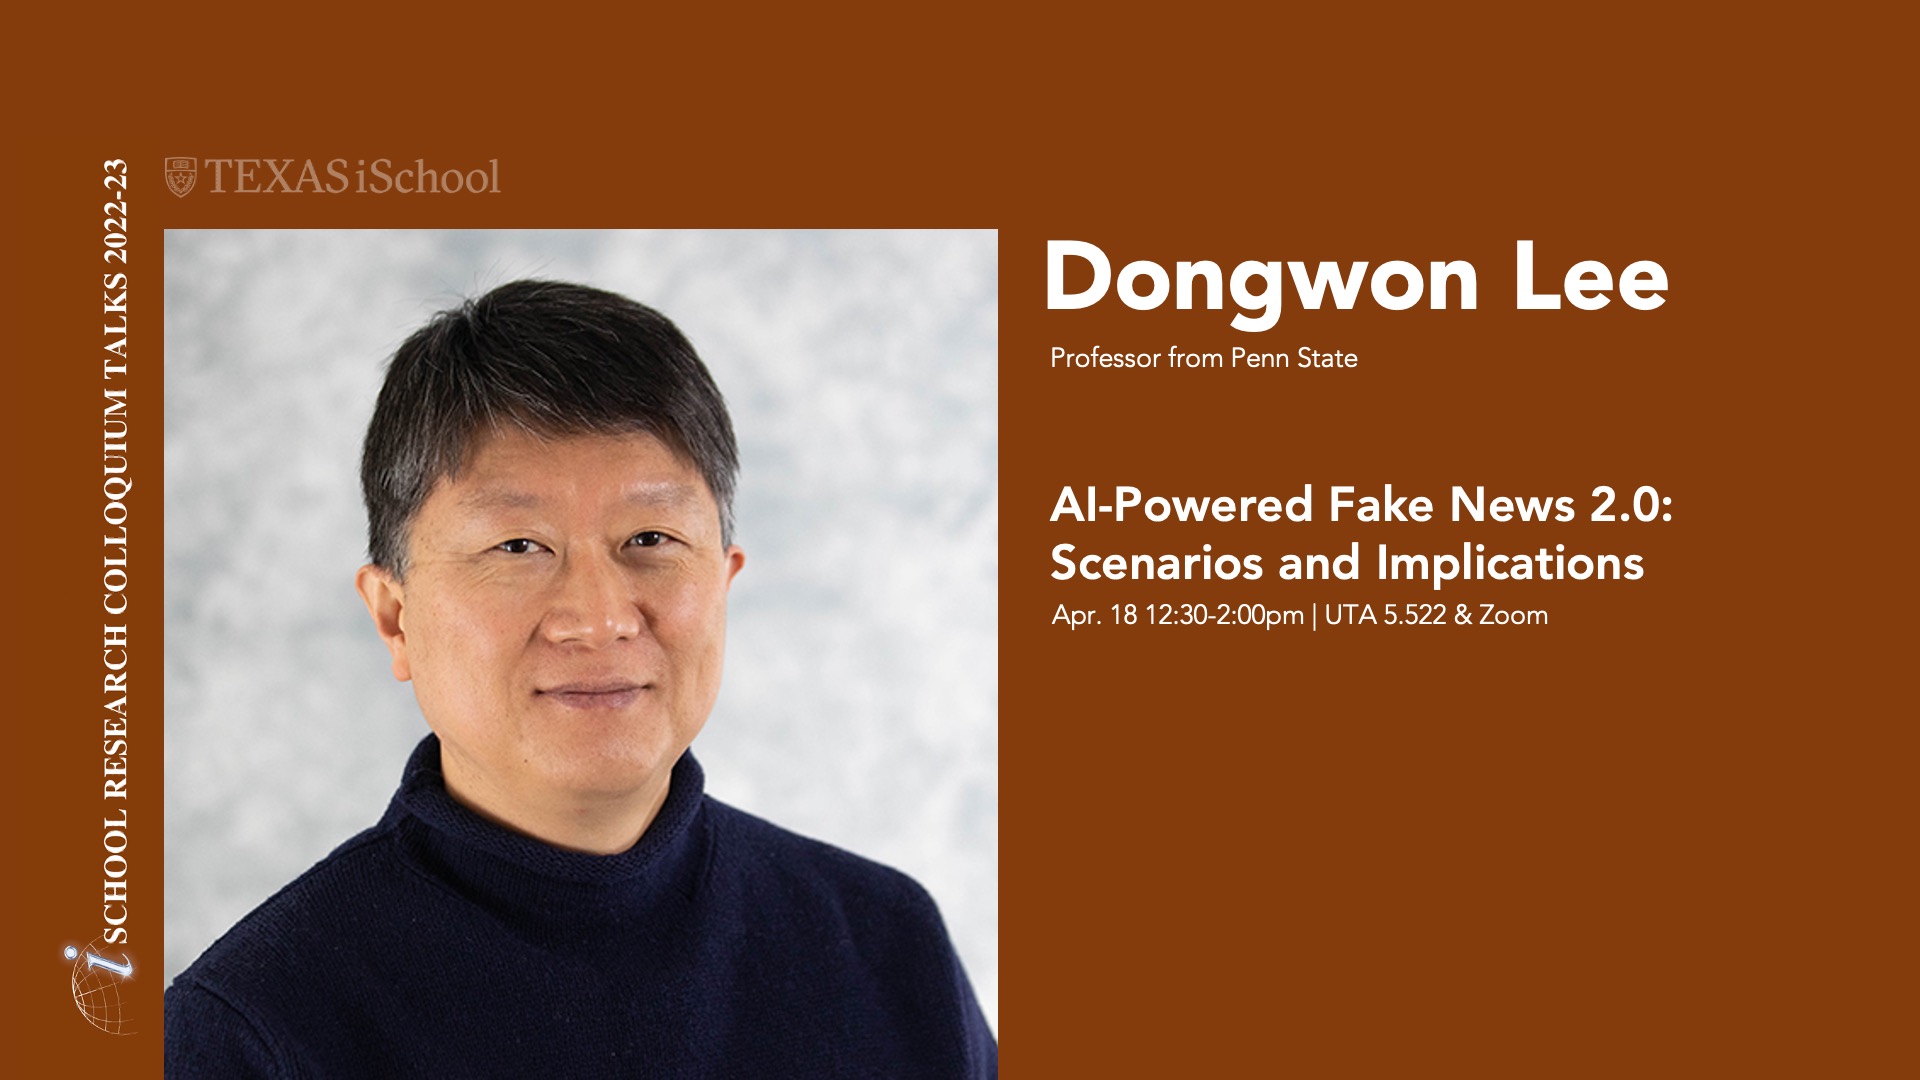 Dongwon Lee